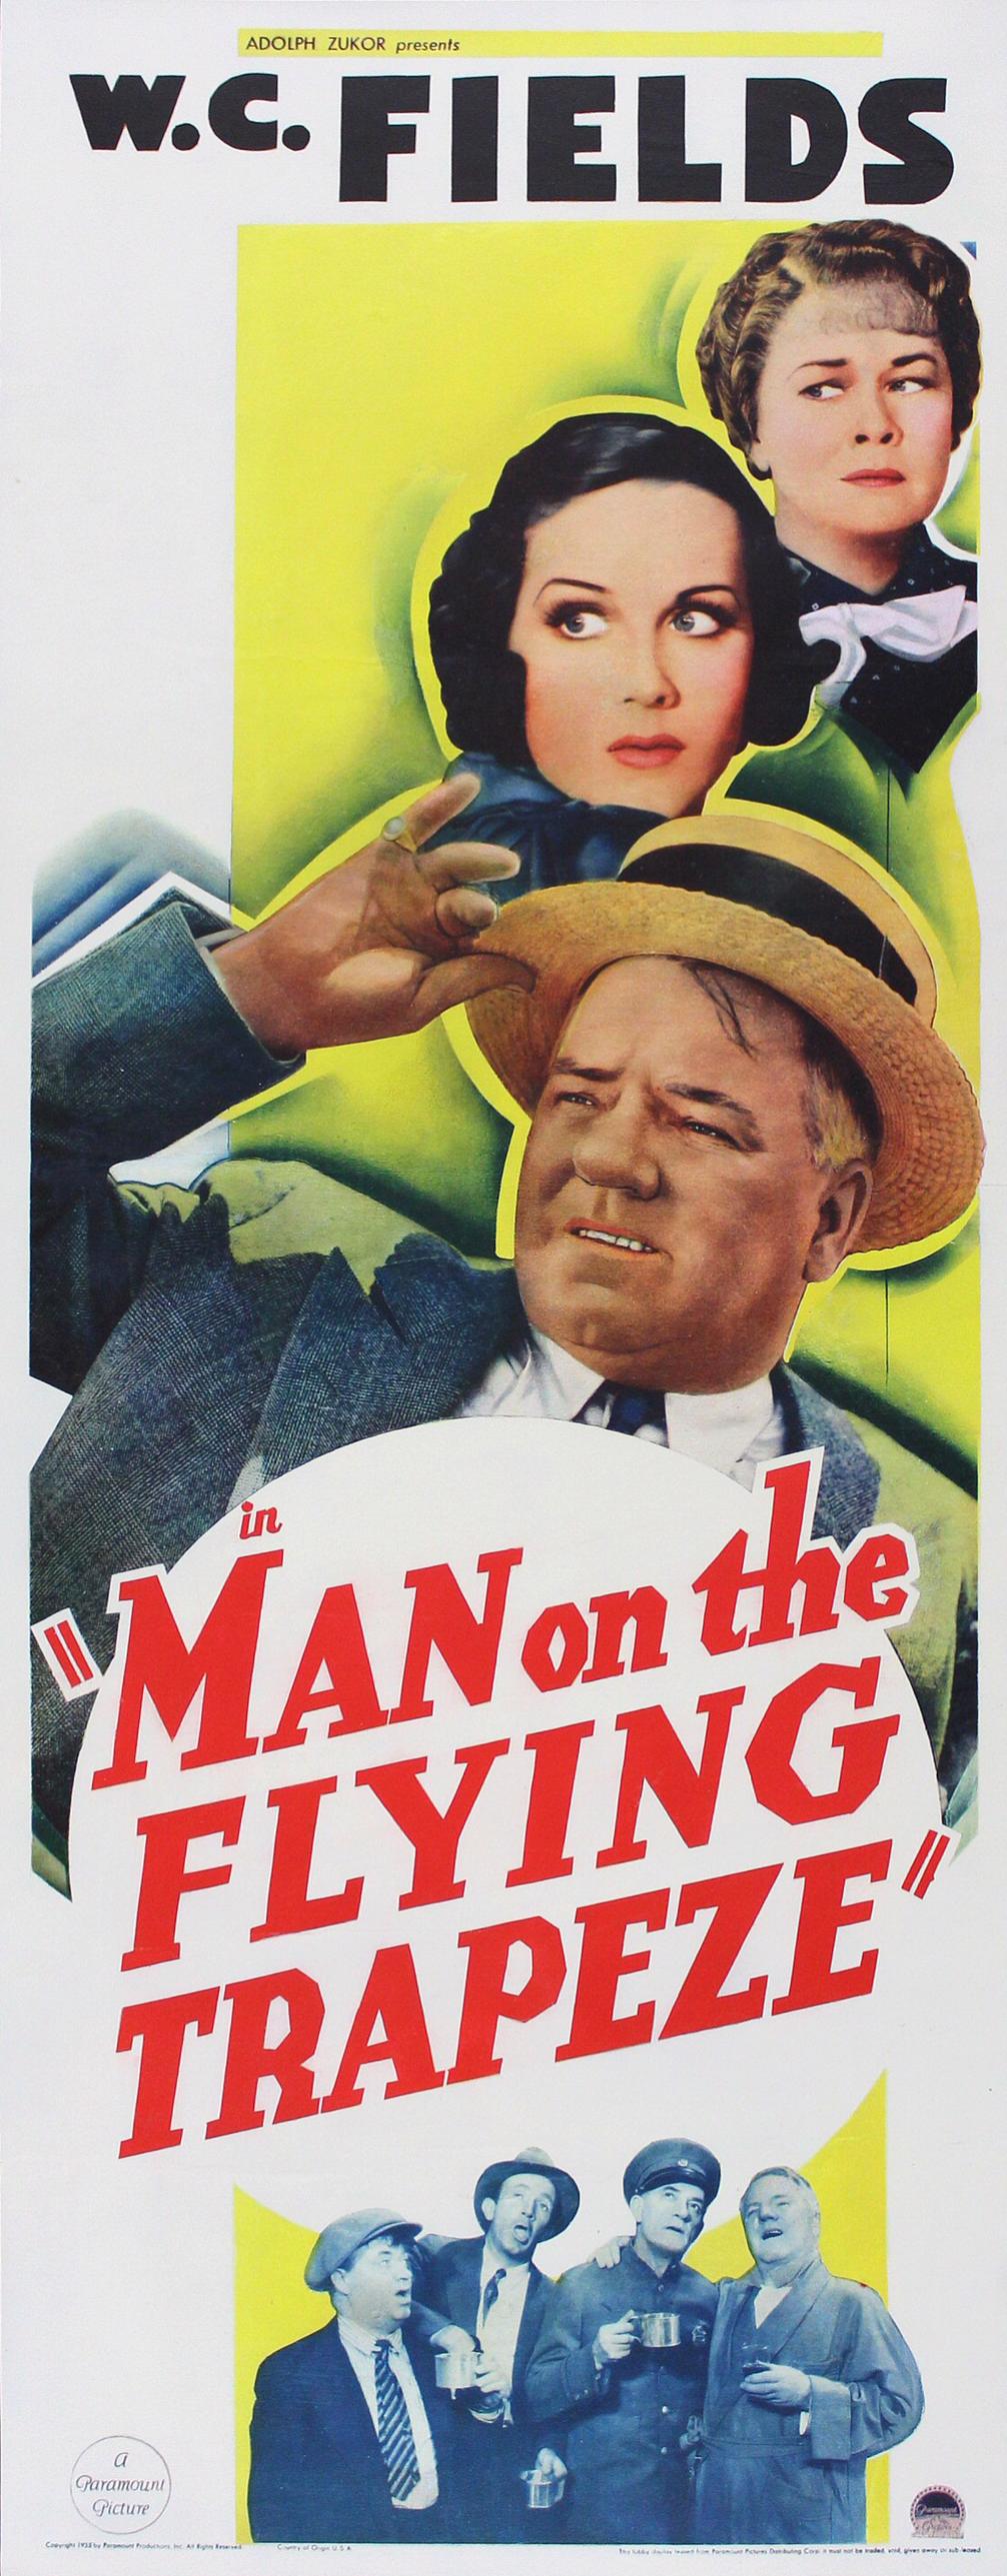 Man on the Flying Trapeze (1935) Screenshot 1 